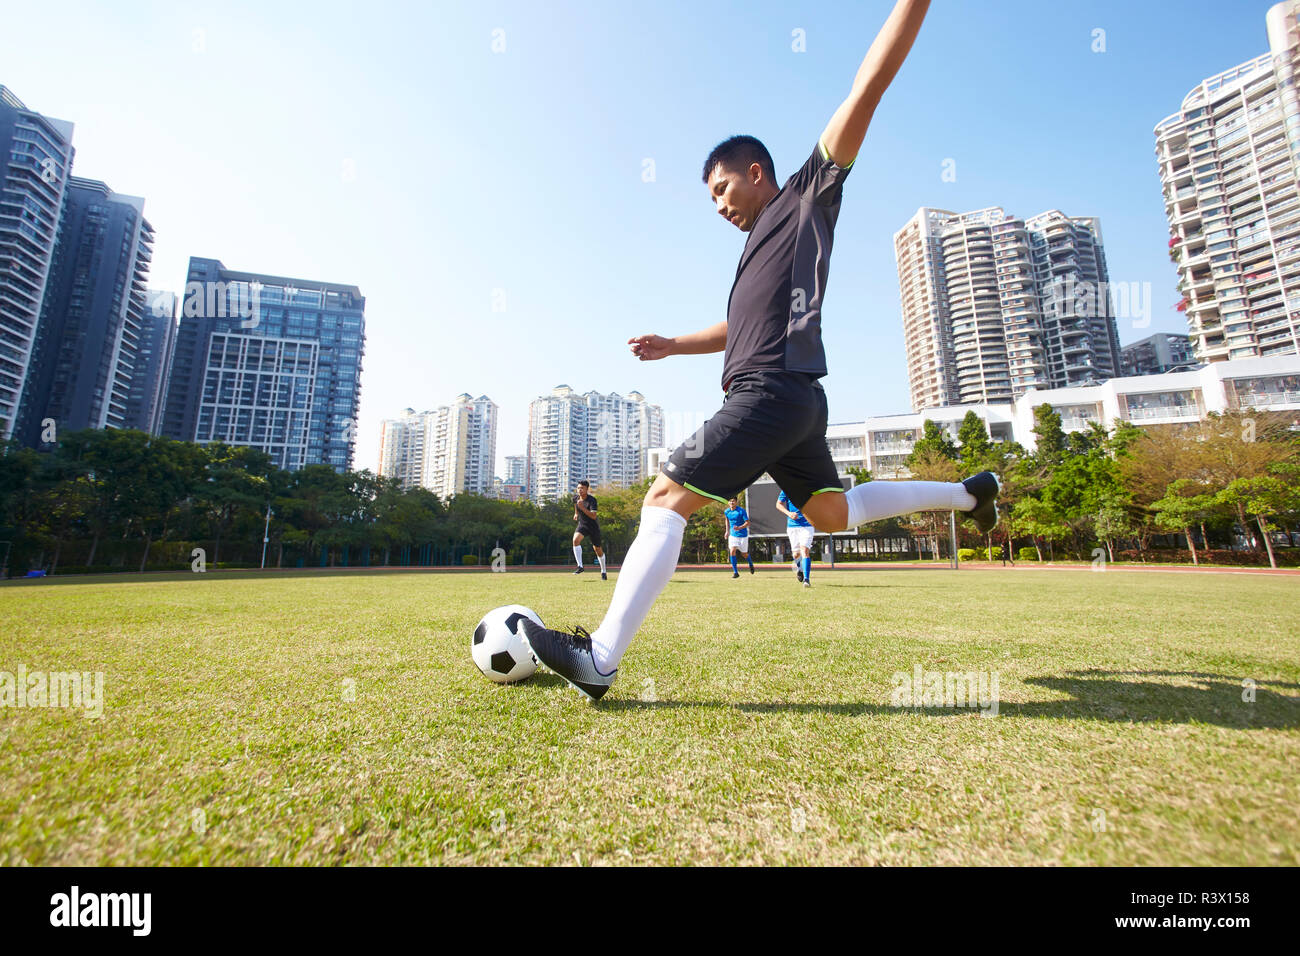 young asian soccer football player shooting the ball during match Stock Photo